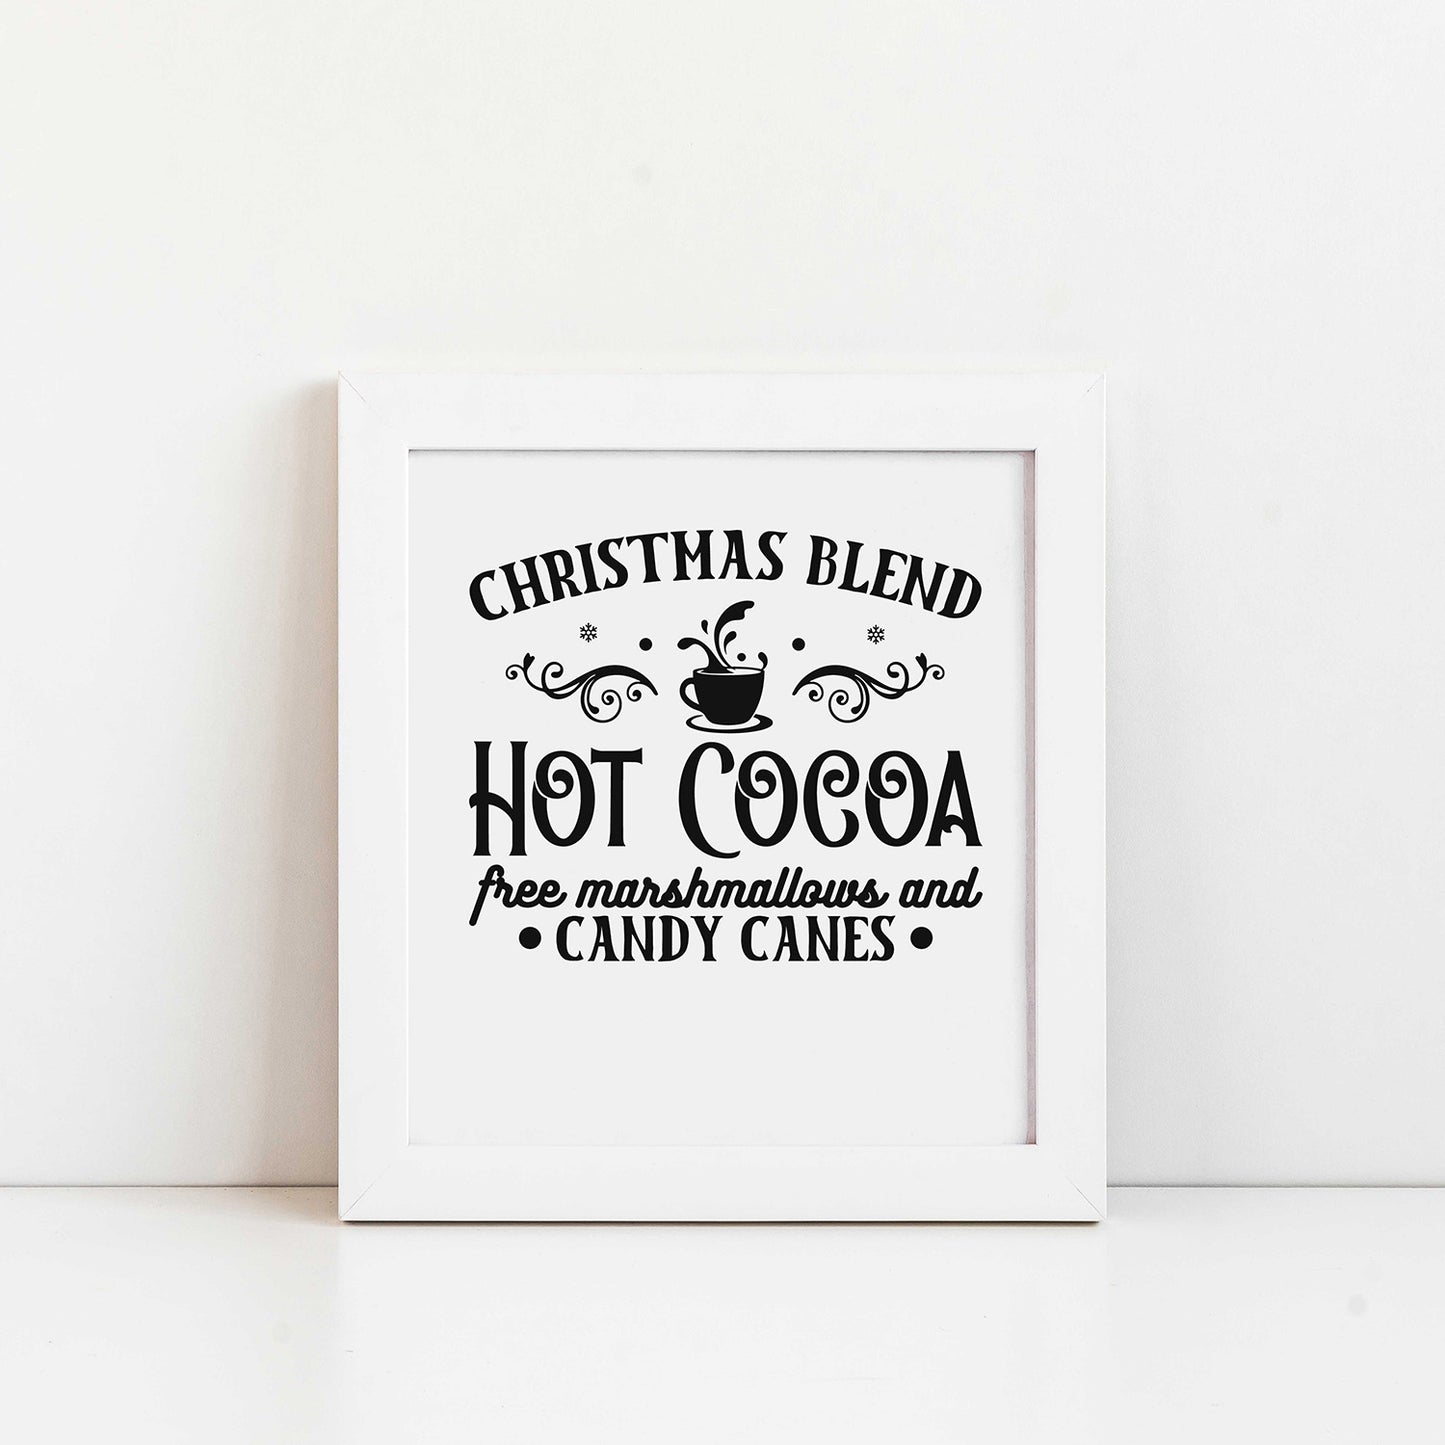 "Christmas Blend Hot Cocoa Free Marshmallows And Candy Canes" Graphic